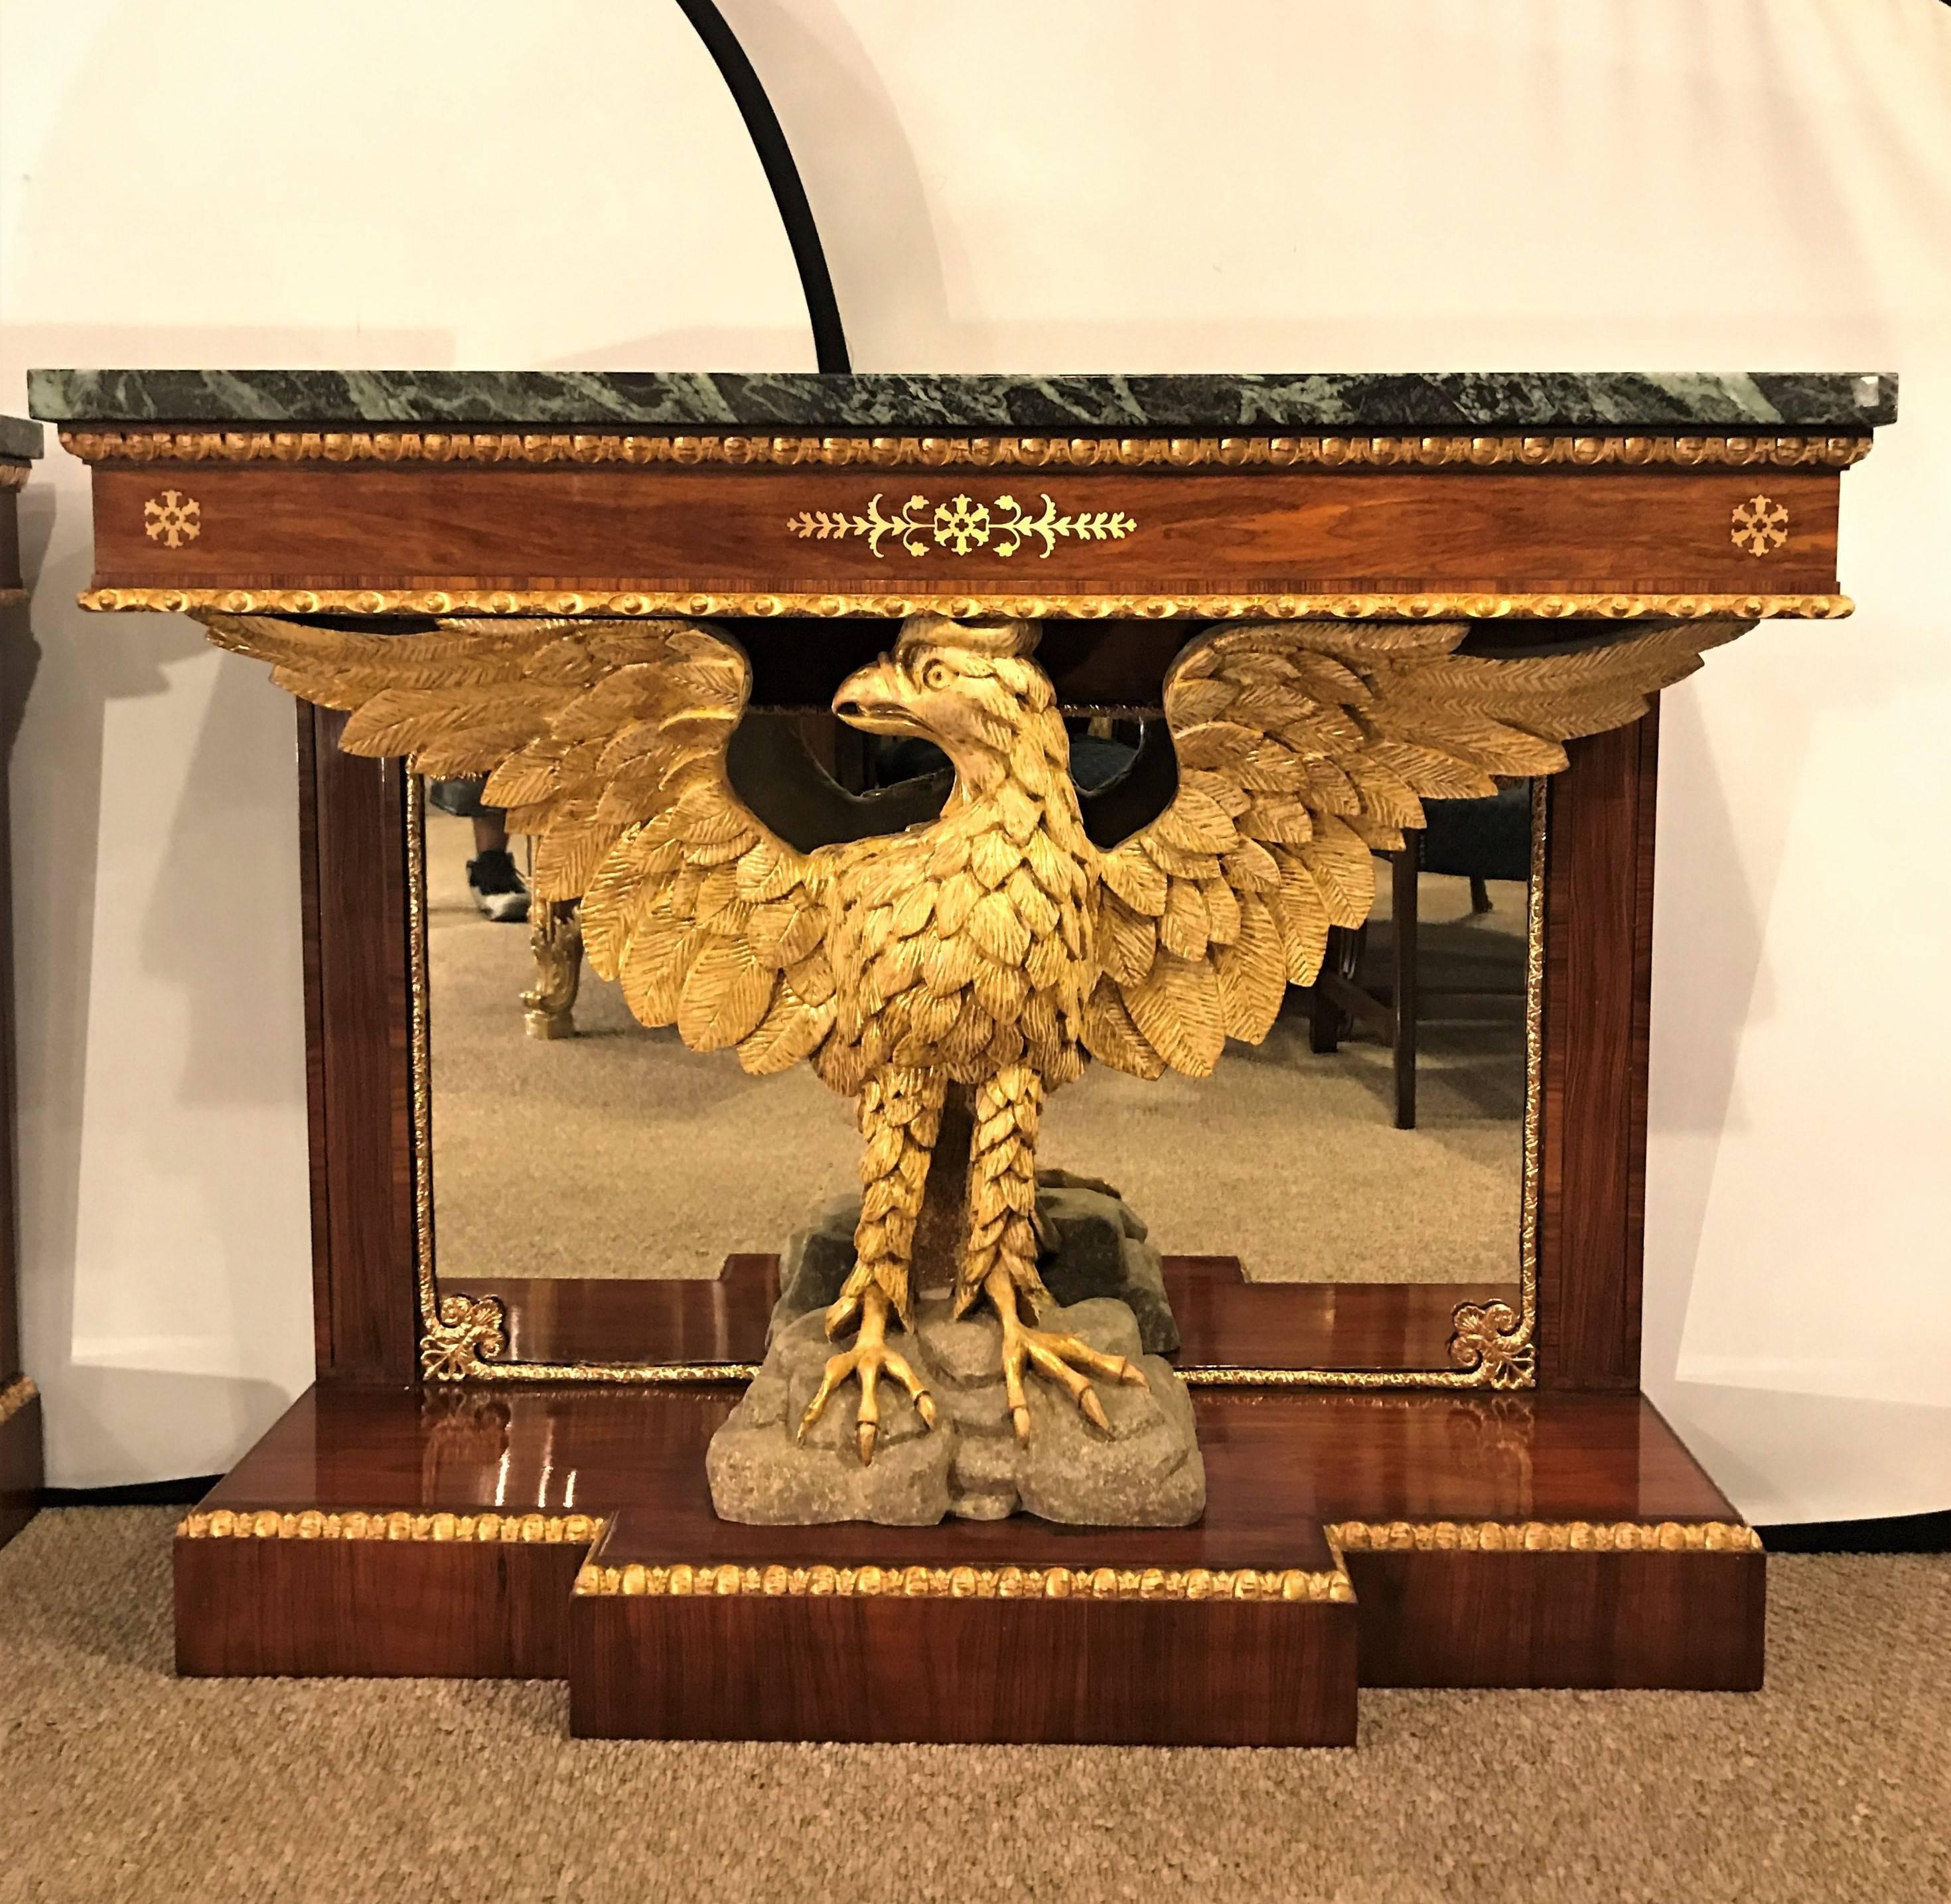 American Designer, Federal Consoles, Mahogany, Marble, Gold Gilt, Mirror, 1940s For Sale 1